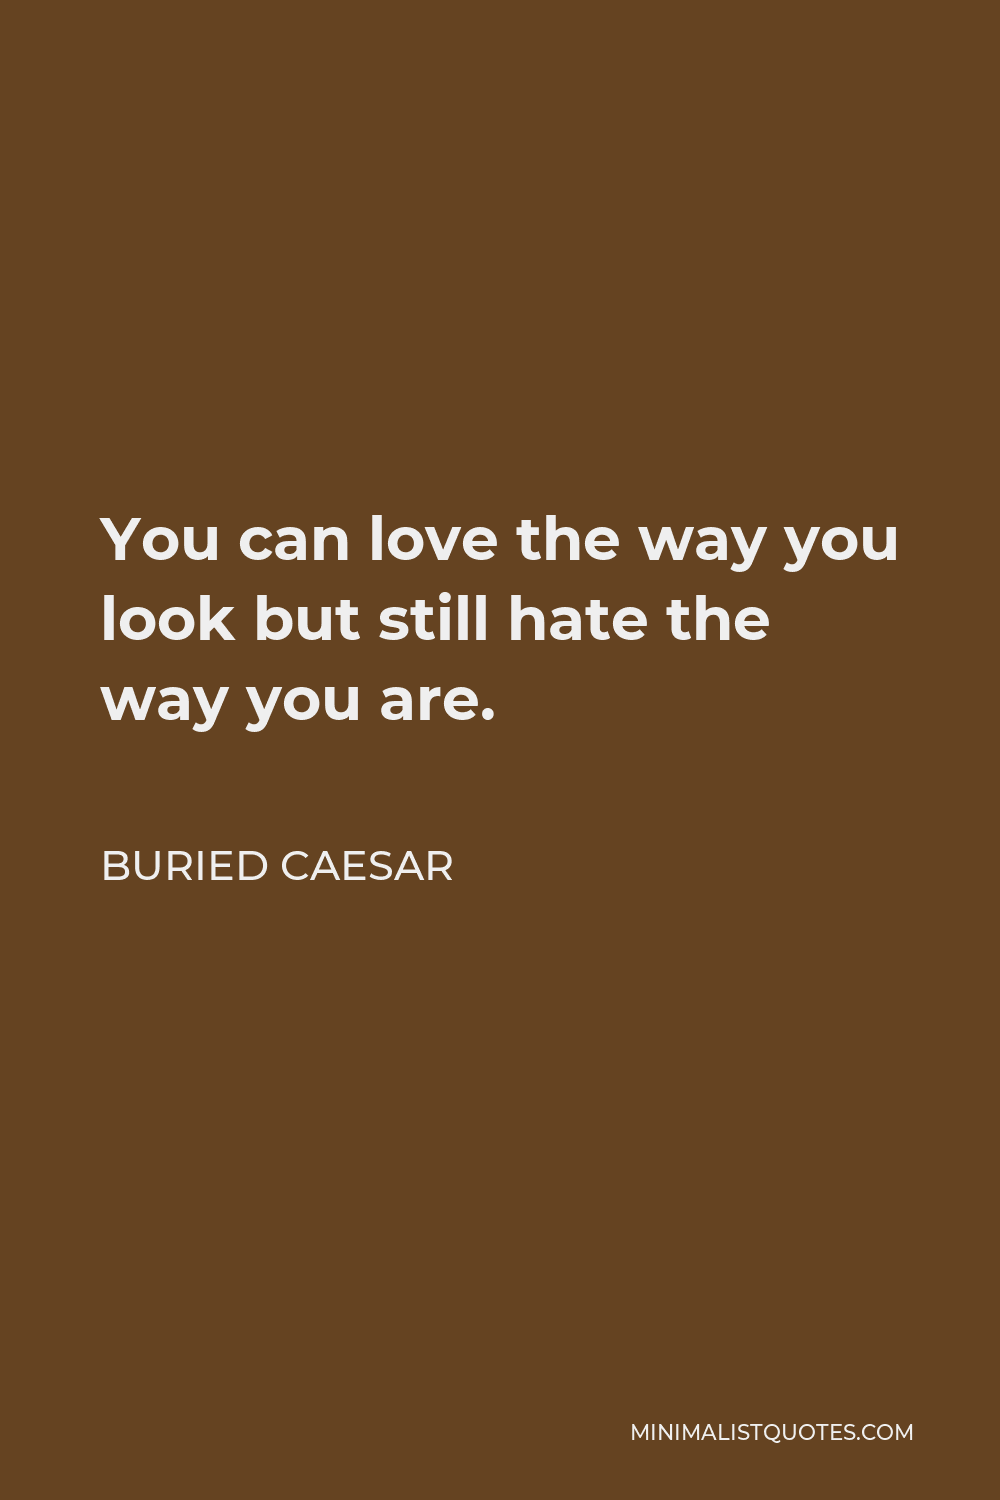 Buried Caesar Quote - You can love the way you look but still hate the way you are.